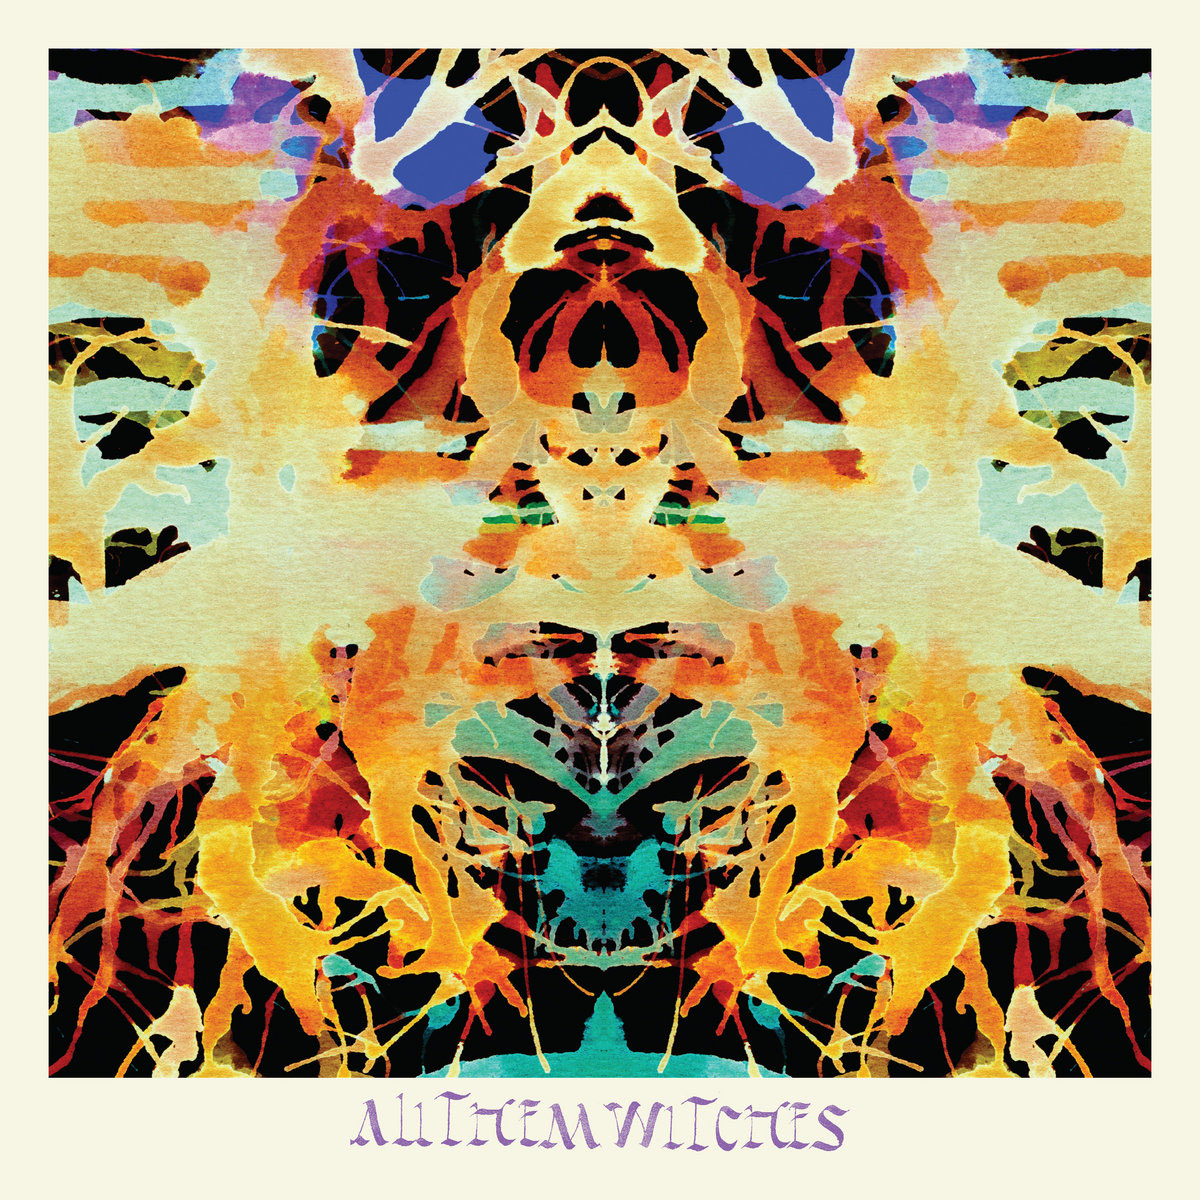 Sleeping Through The War by All Them Witches